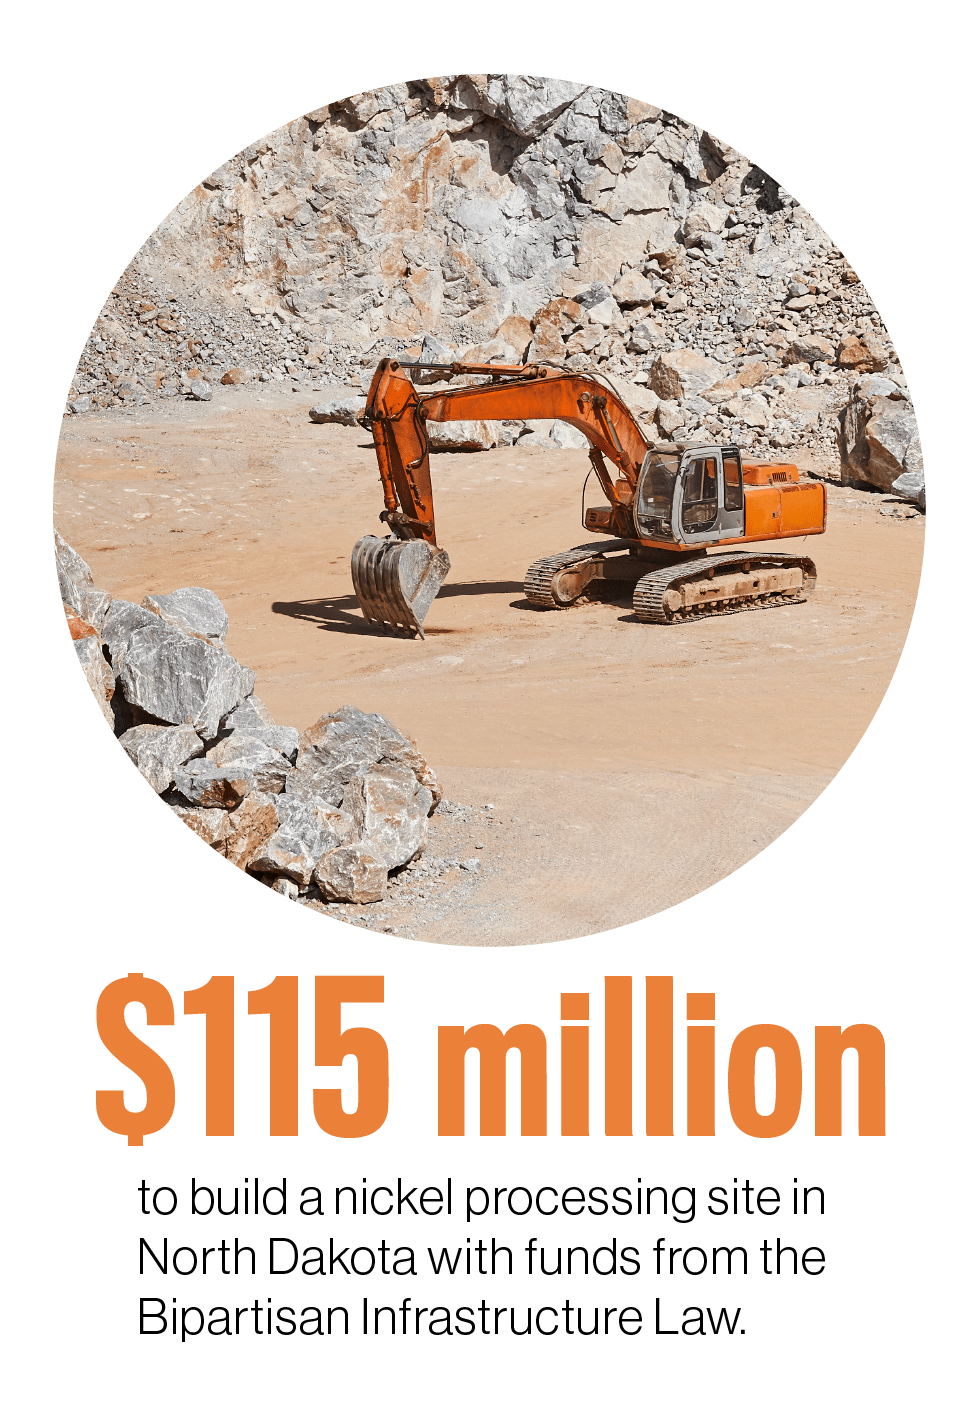 $115 million to build a nickel processing site in North Dakota with funds from the Bipartisan Infrastructure Law